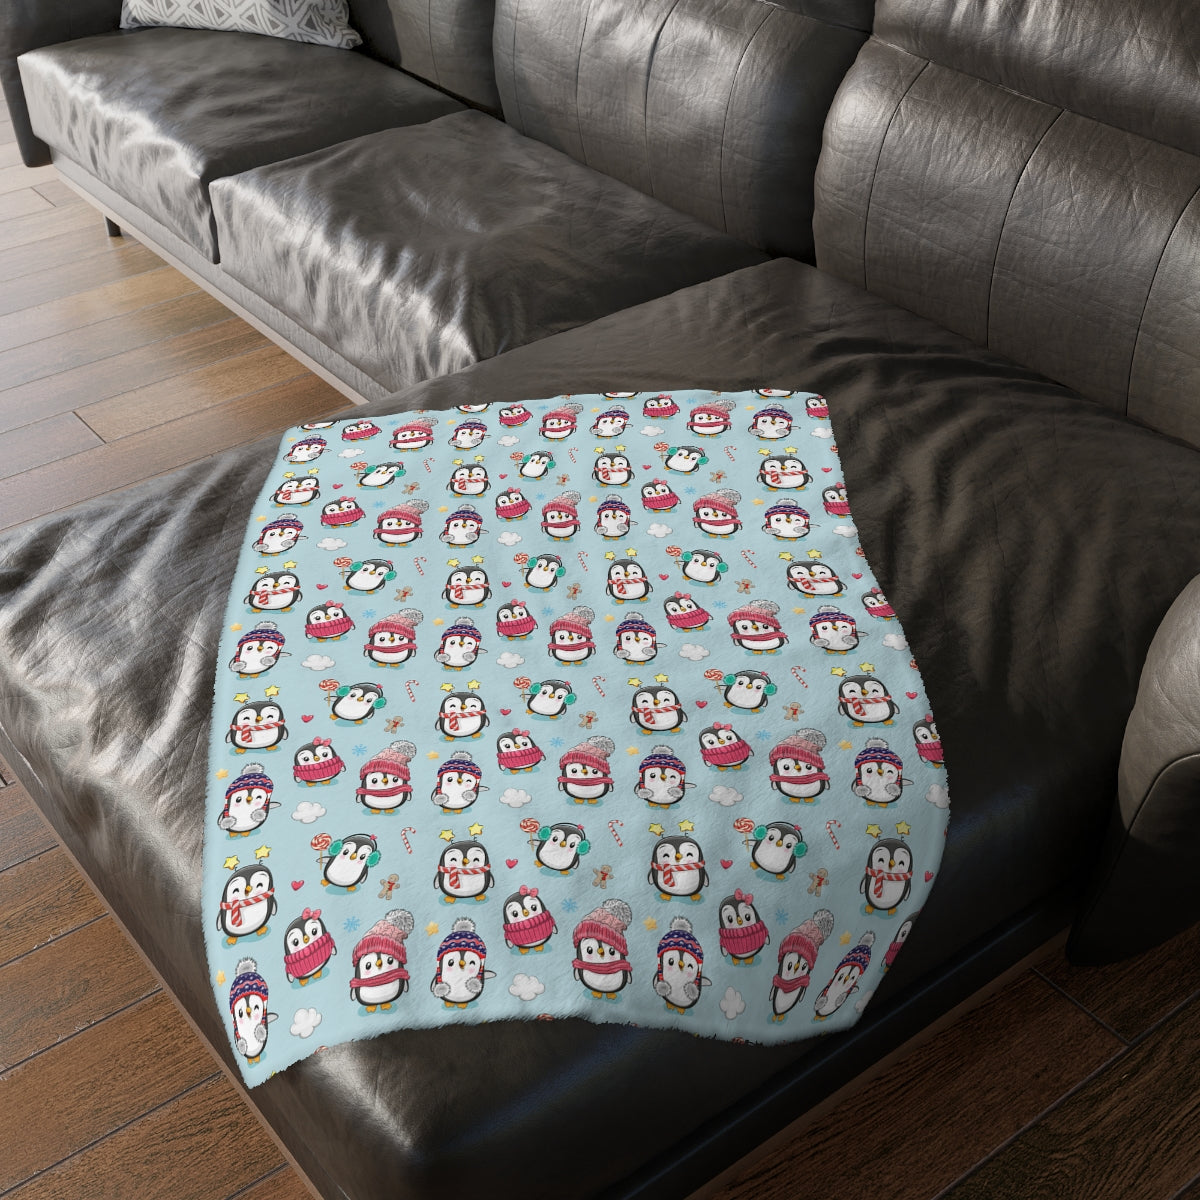 Penguins in Winter Clothes Velveteen Minky Blanket (Two-sided print)